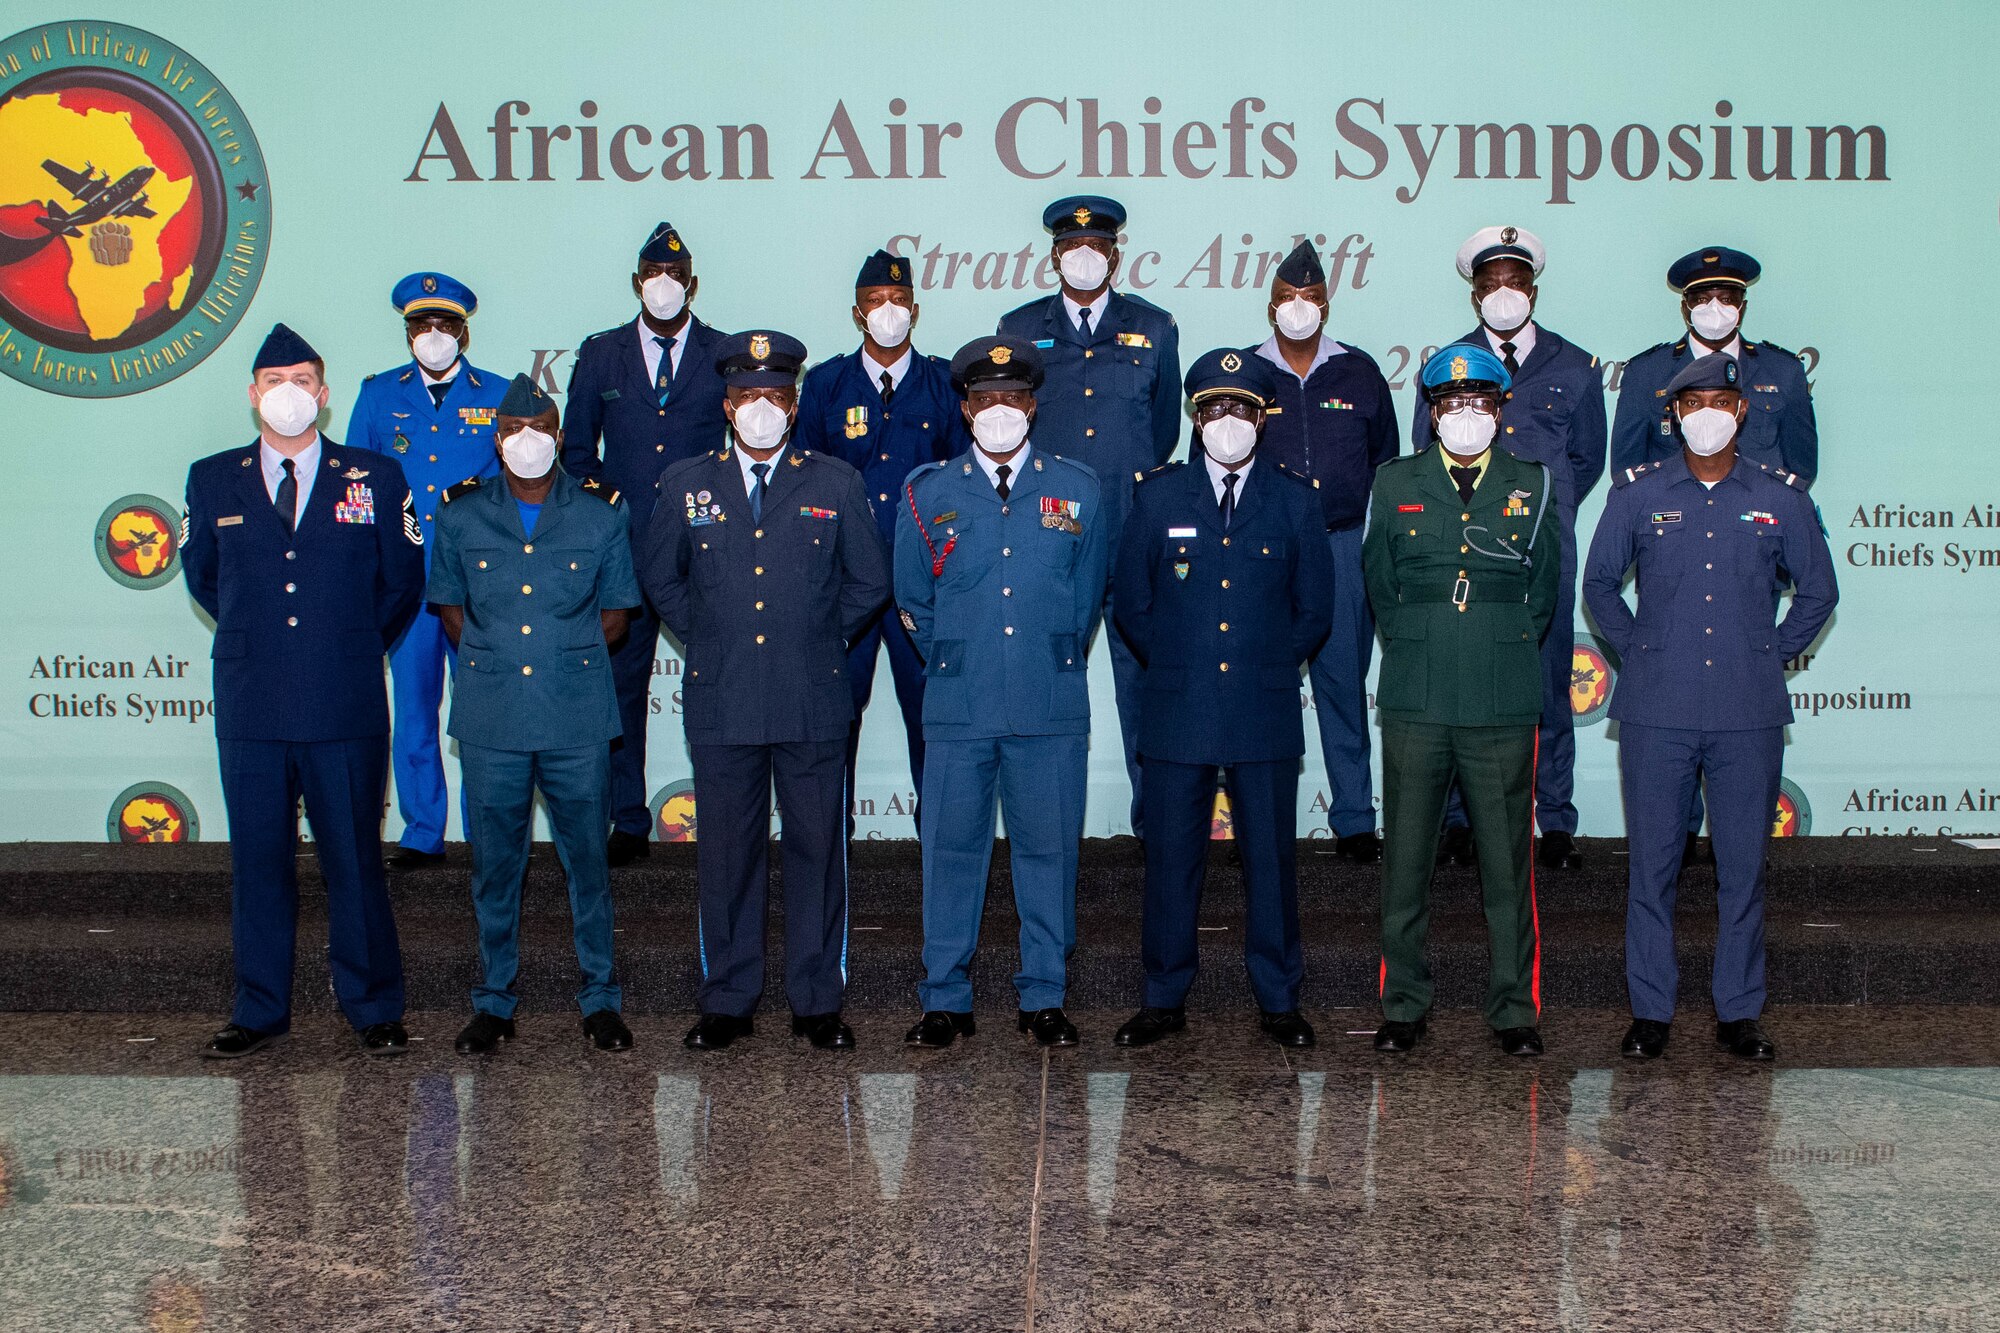 Senior enlisted leaders from the U.S. Air Force and African nations pose for a photo with African air chiefs during the 2022 African Air Chiefs Symposium in Kigali, Rwanda, Jan. 25, 2022. The symposium aims to increase the number of partner nations involved in the Association of African Air Forces and seeks to identify key challenges confronting African air chiefs and aims to strengthen partner networks within Africa by expanding membership of the AAAF. (U.S. Air Force photo by Senior Airman Brooke Moeder)